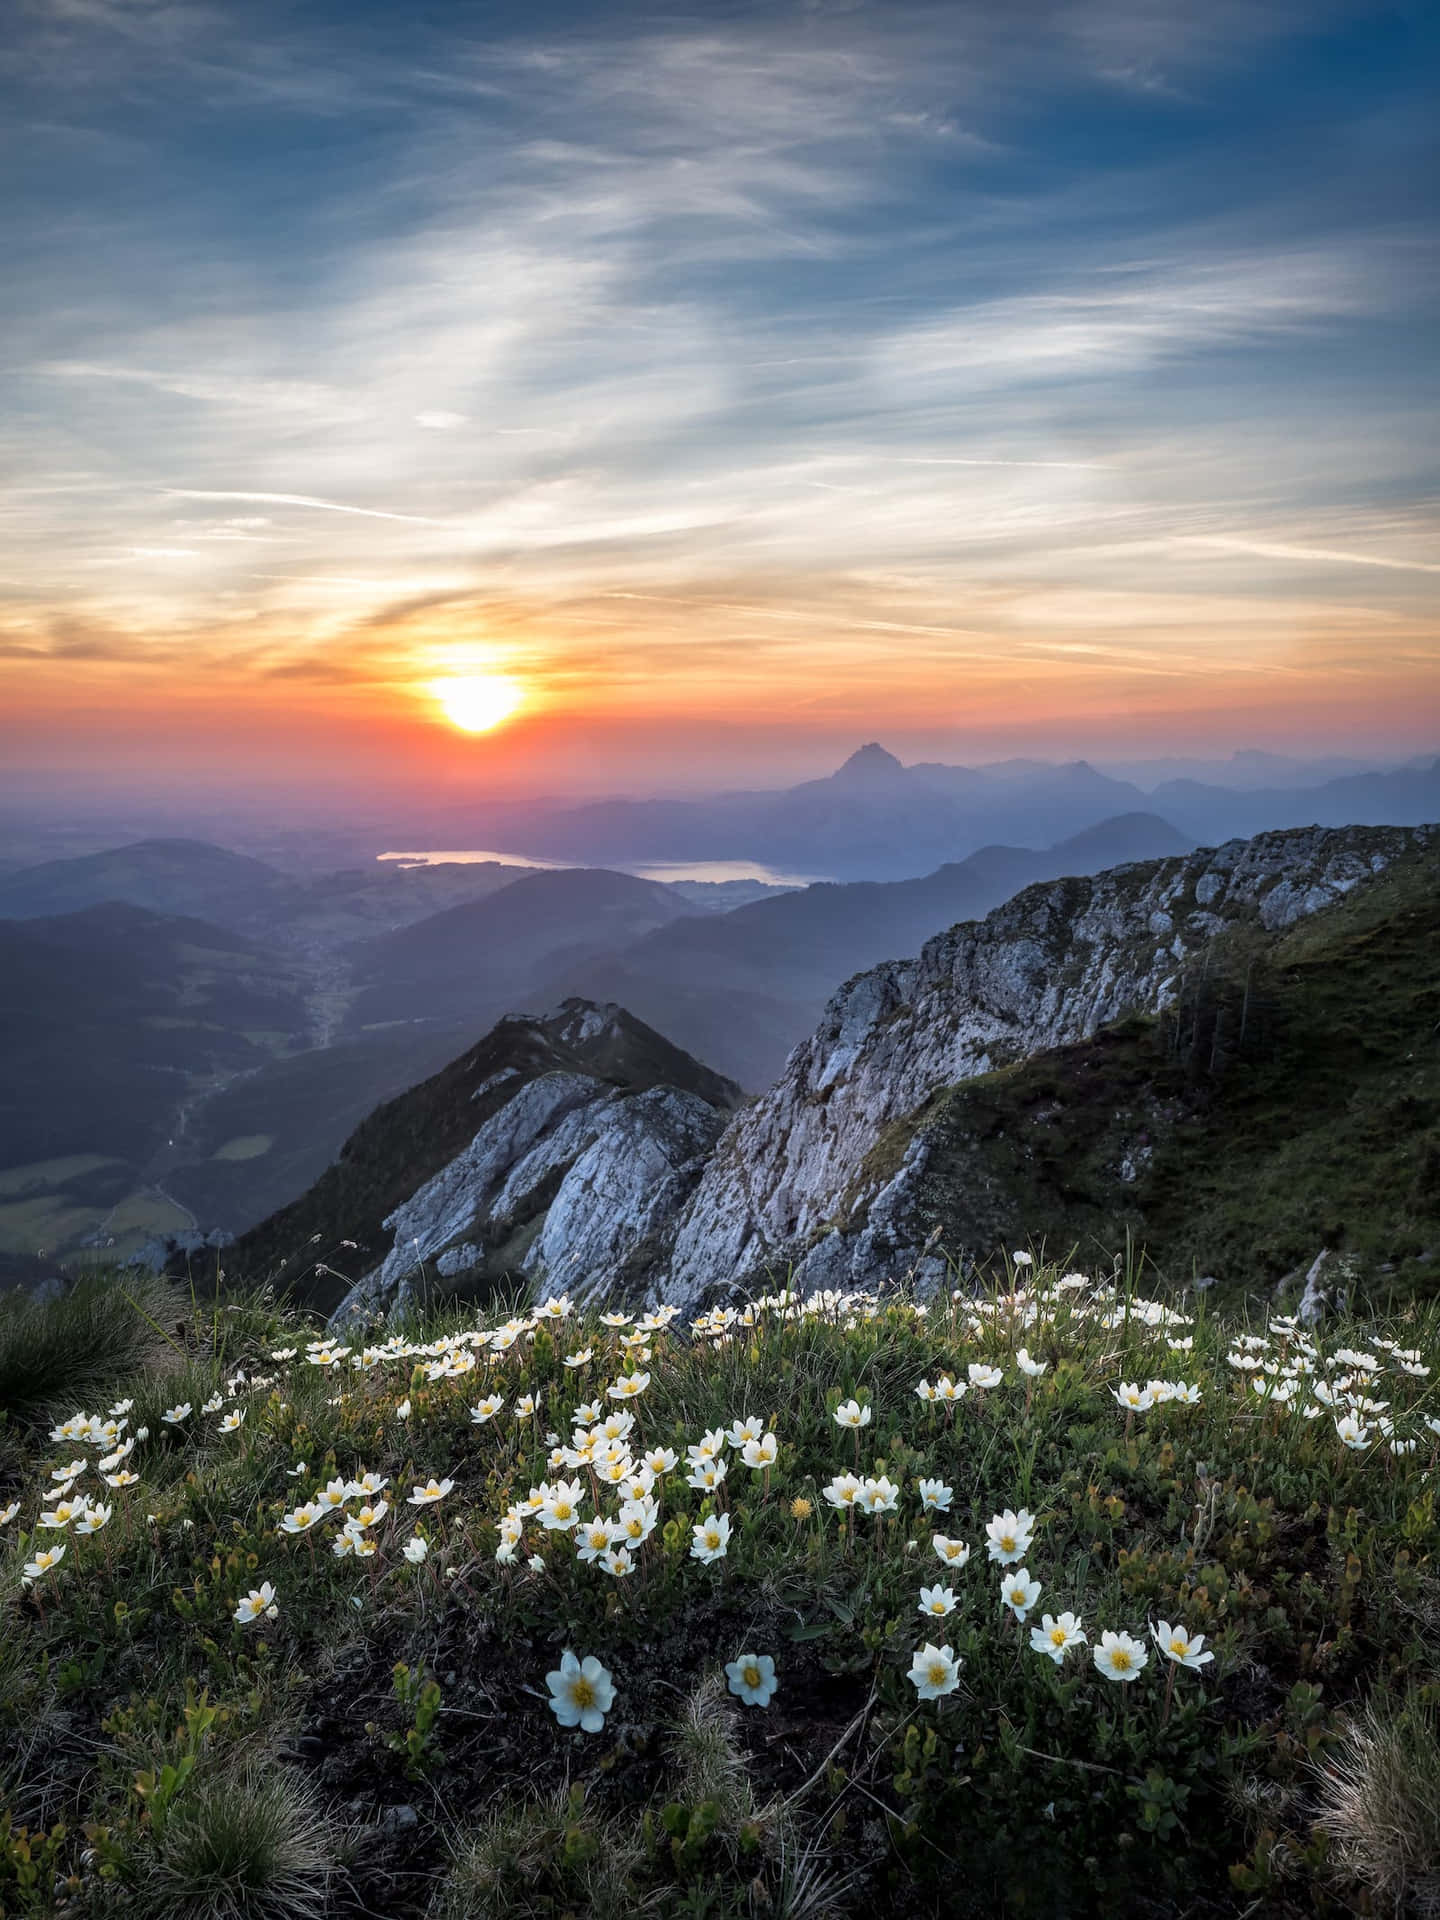 Cute Flowers At Sunset On The Mountains Wallpaper